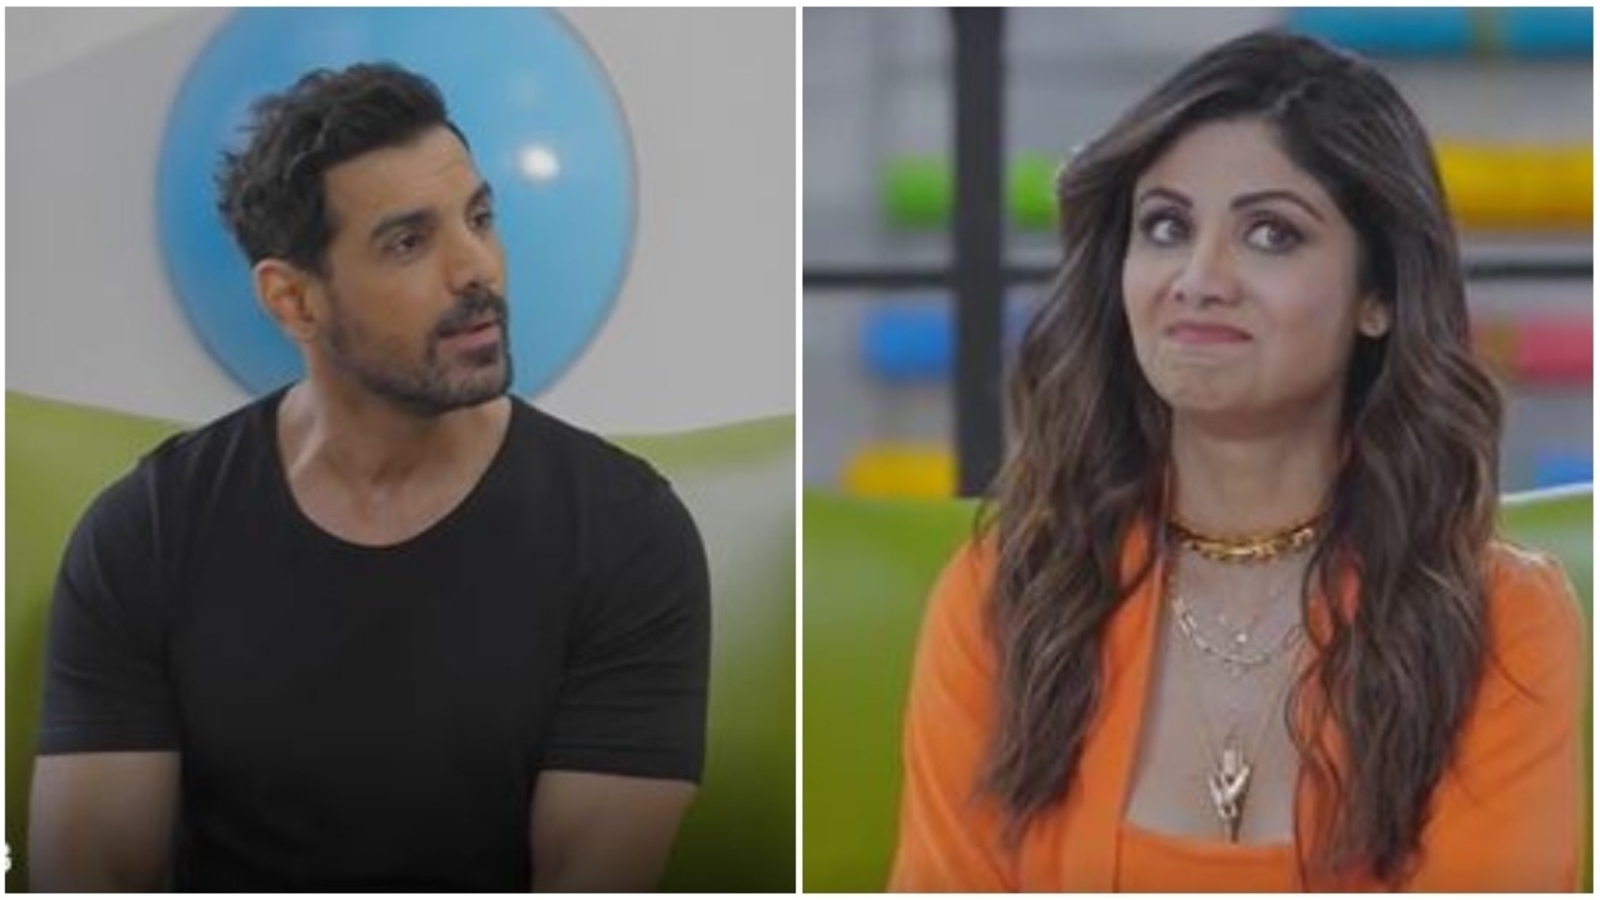 John Abraham tells Shilpa Shetty ‘men shouldn’t look pretty’, people ask: ‘Why these double standards?’